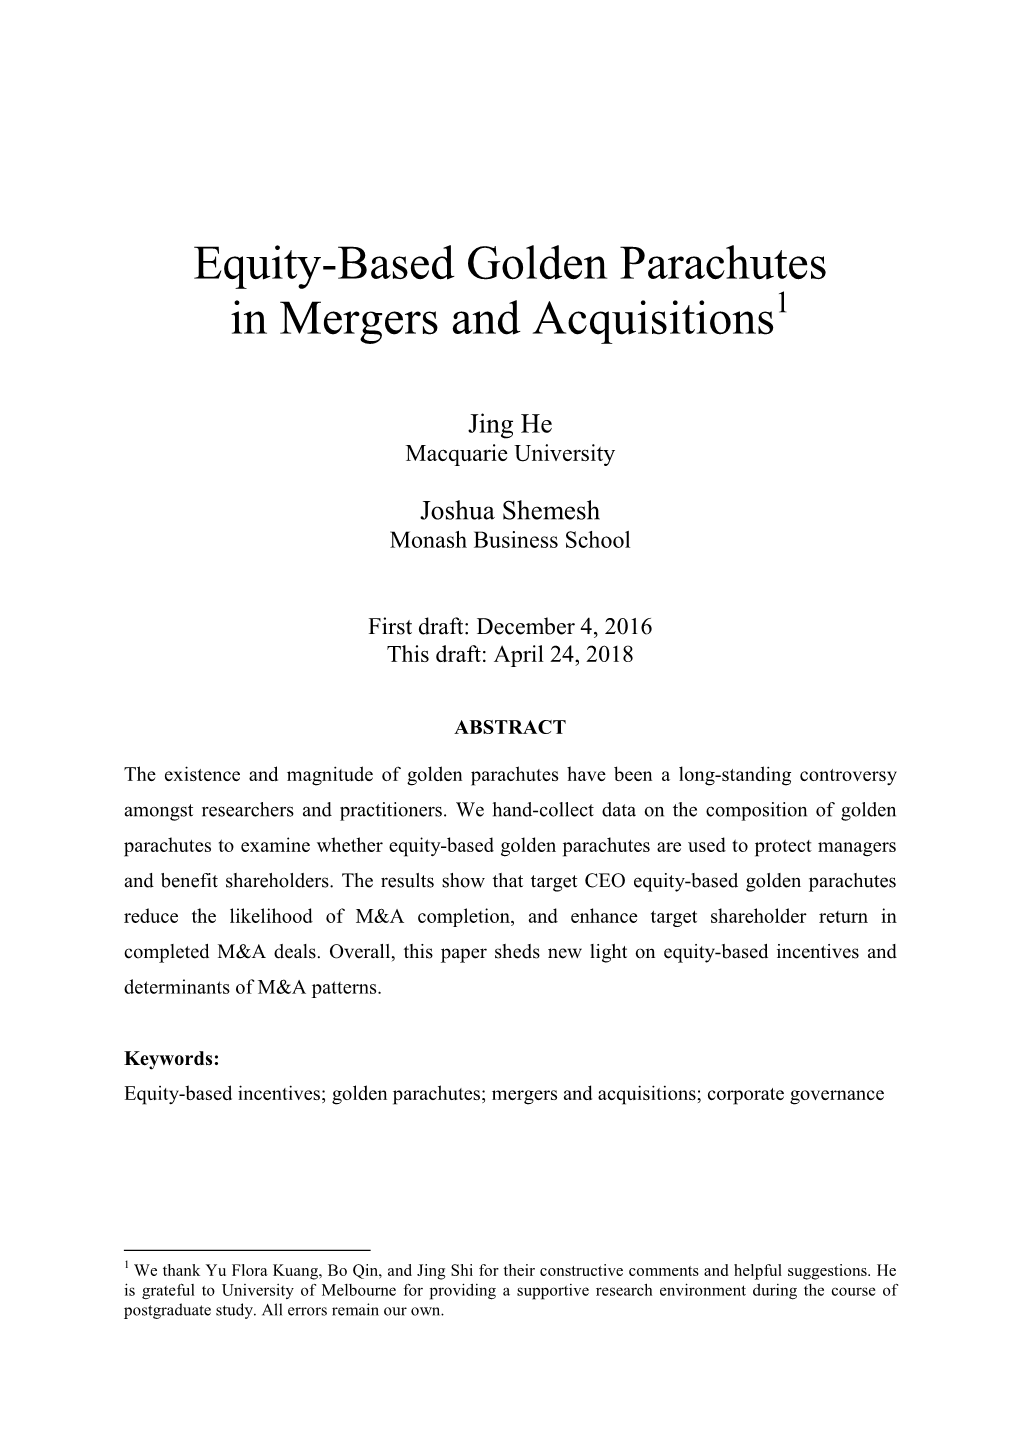 Equity-Based Golden Parachutes in Mergers and Acquisitions1